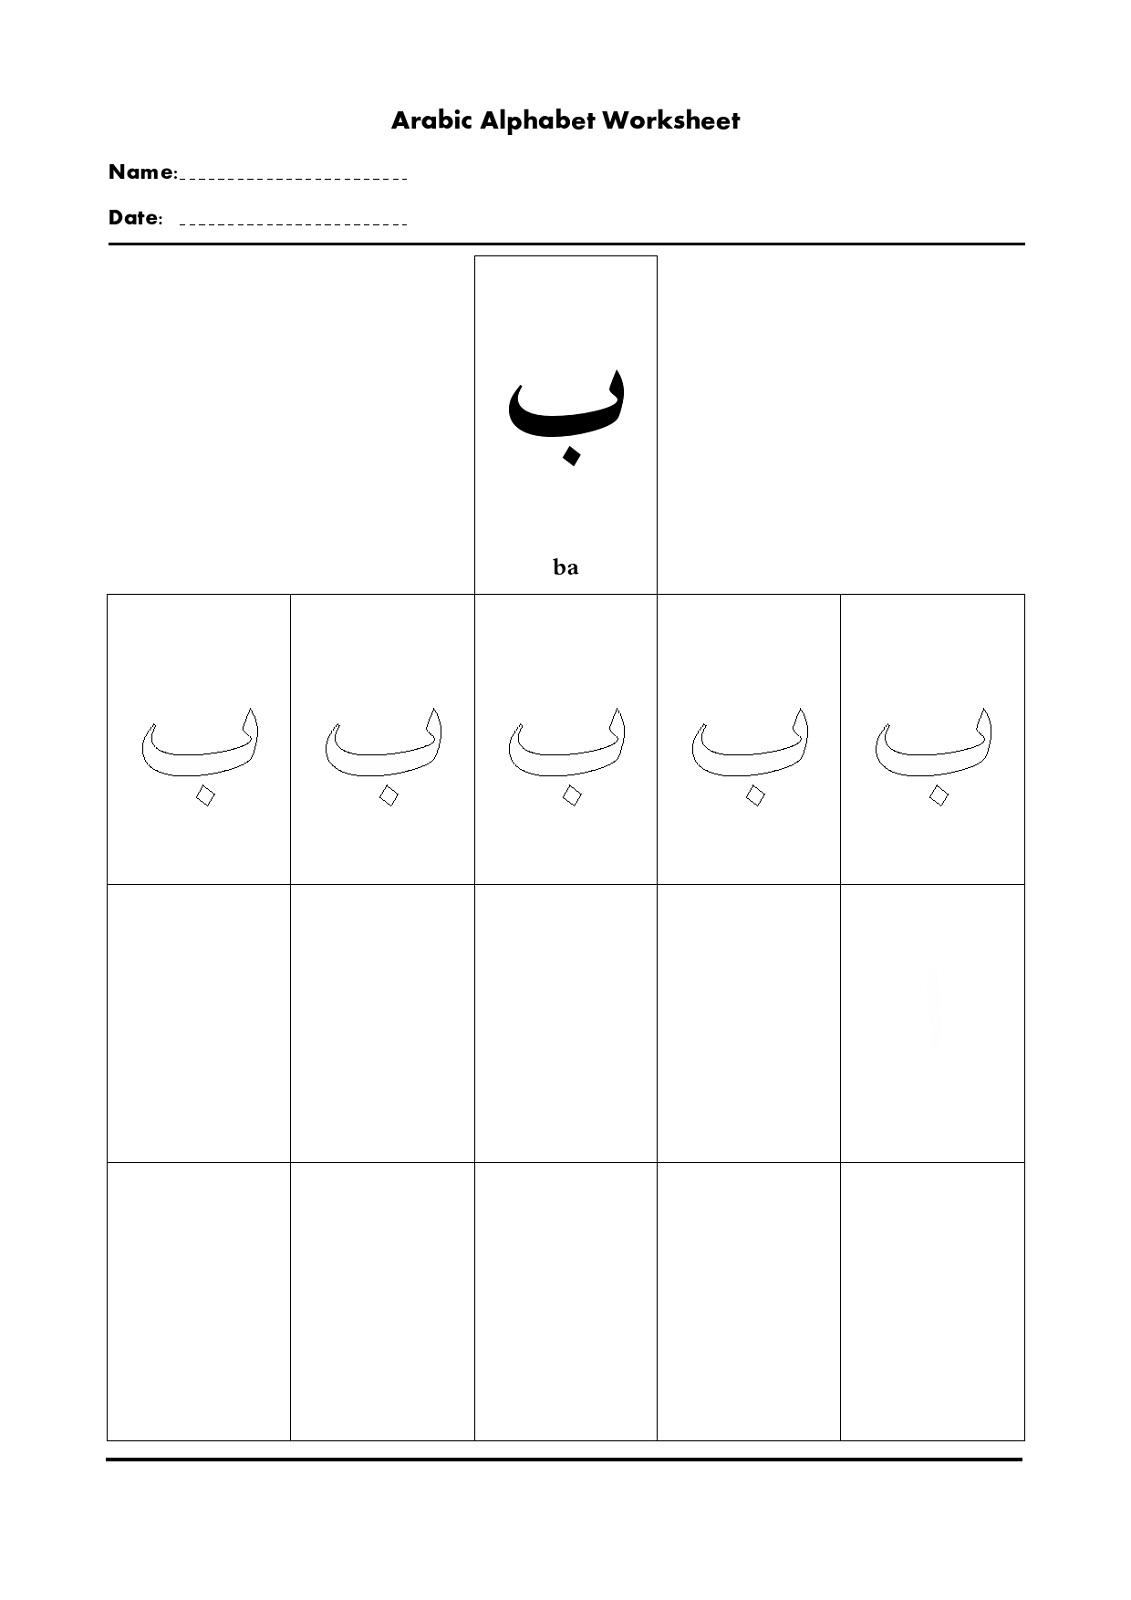 student-learning-to-write-the-arabic-alphabet-incl-worksheet-youtube